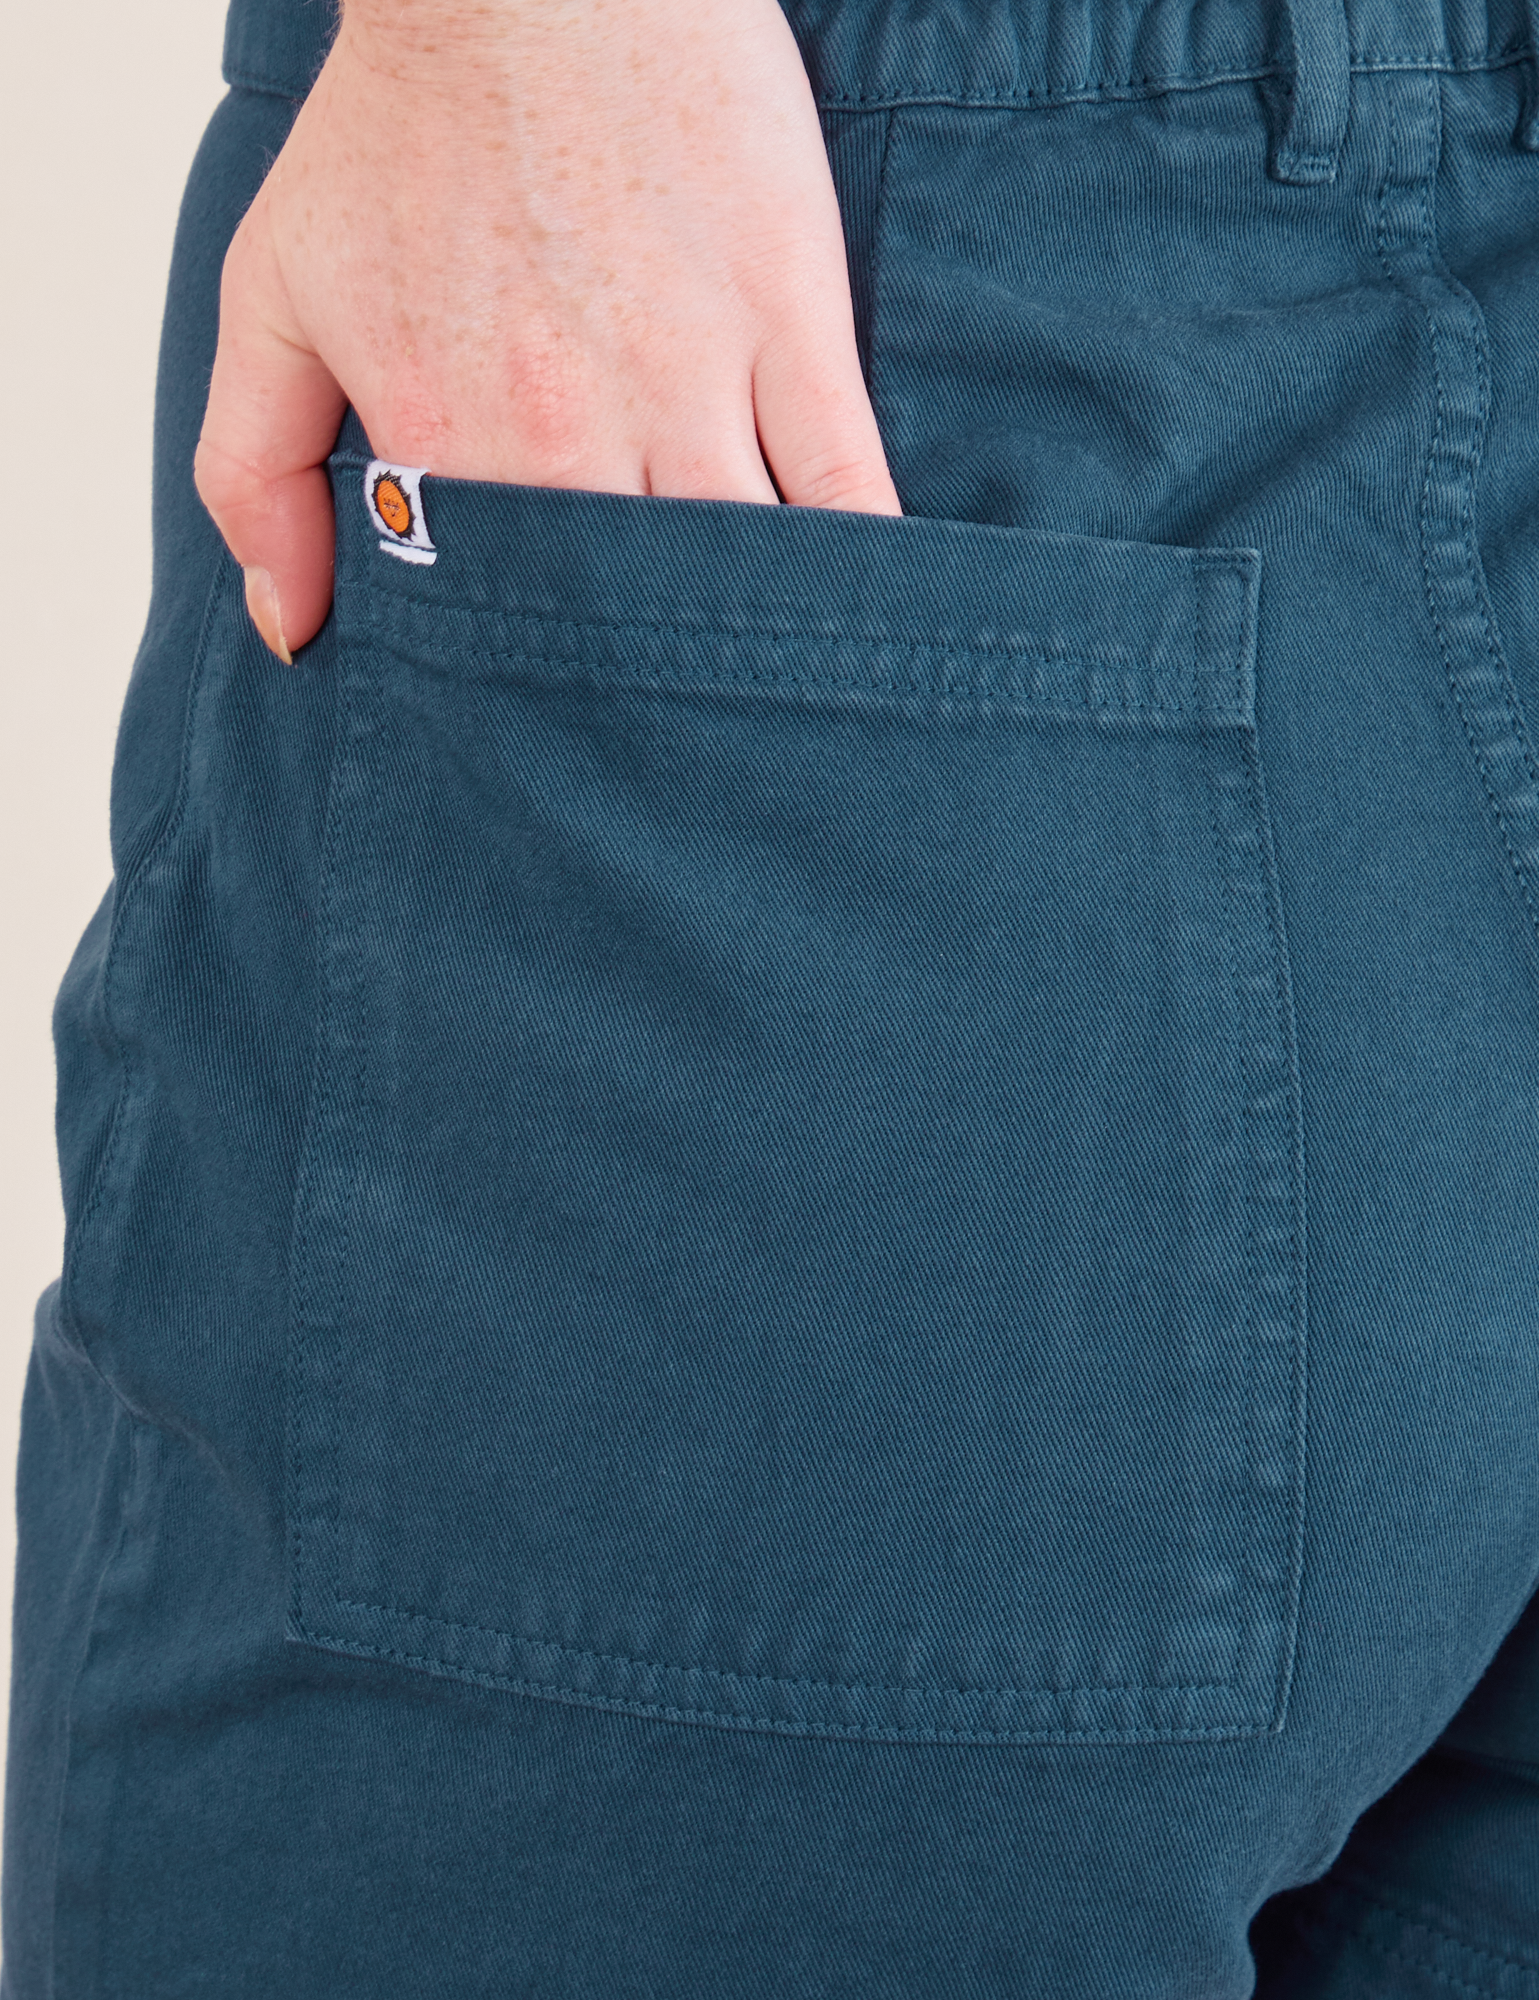 Western Shorts in Lagoon back pocket close up. Margaret has their hands in the pocket.